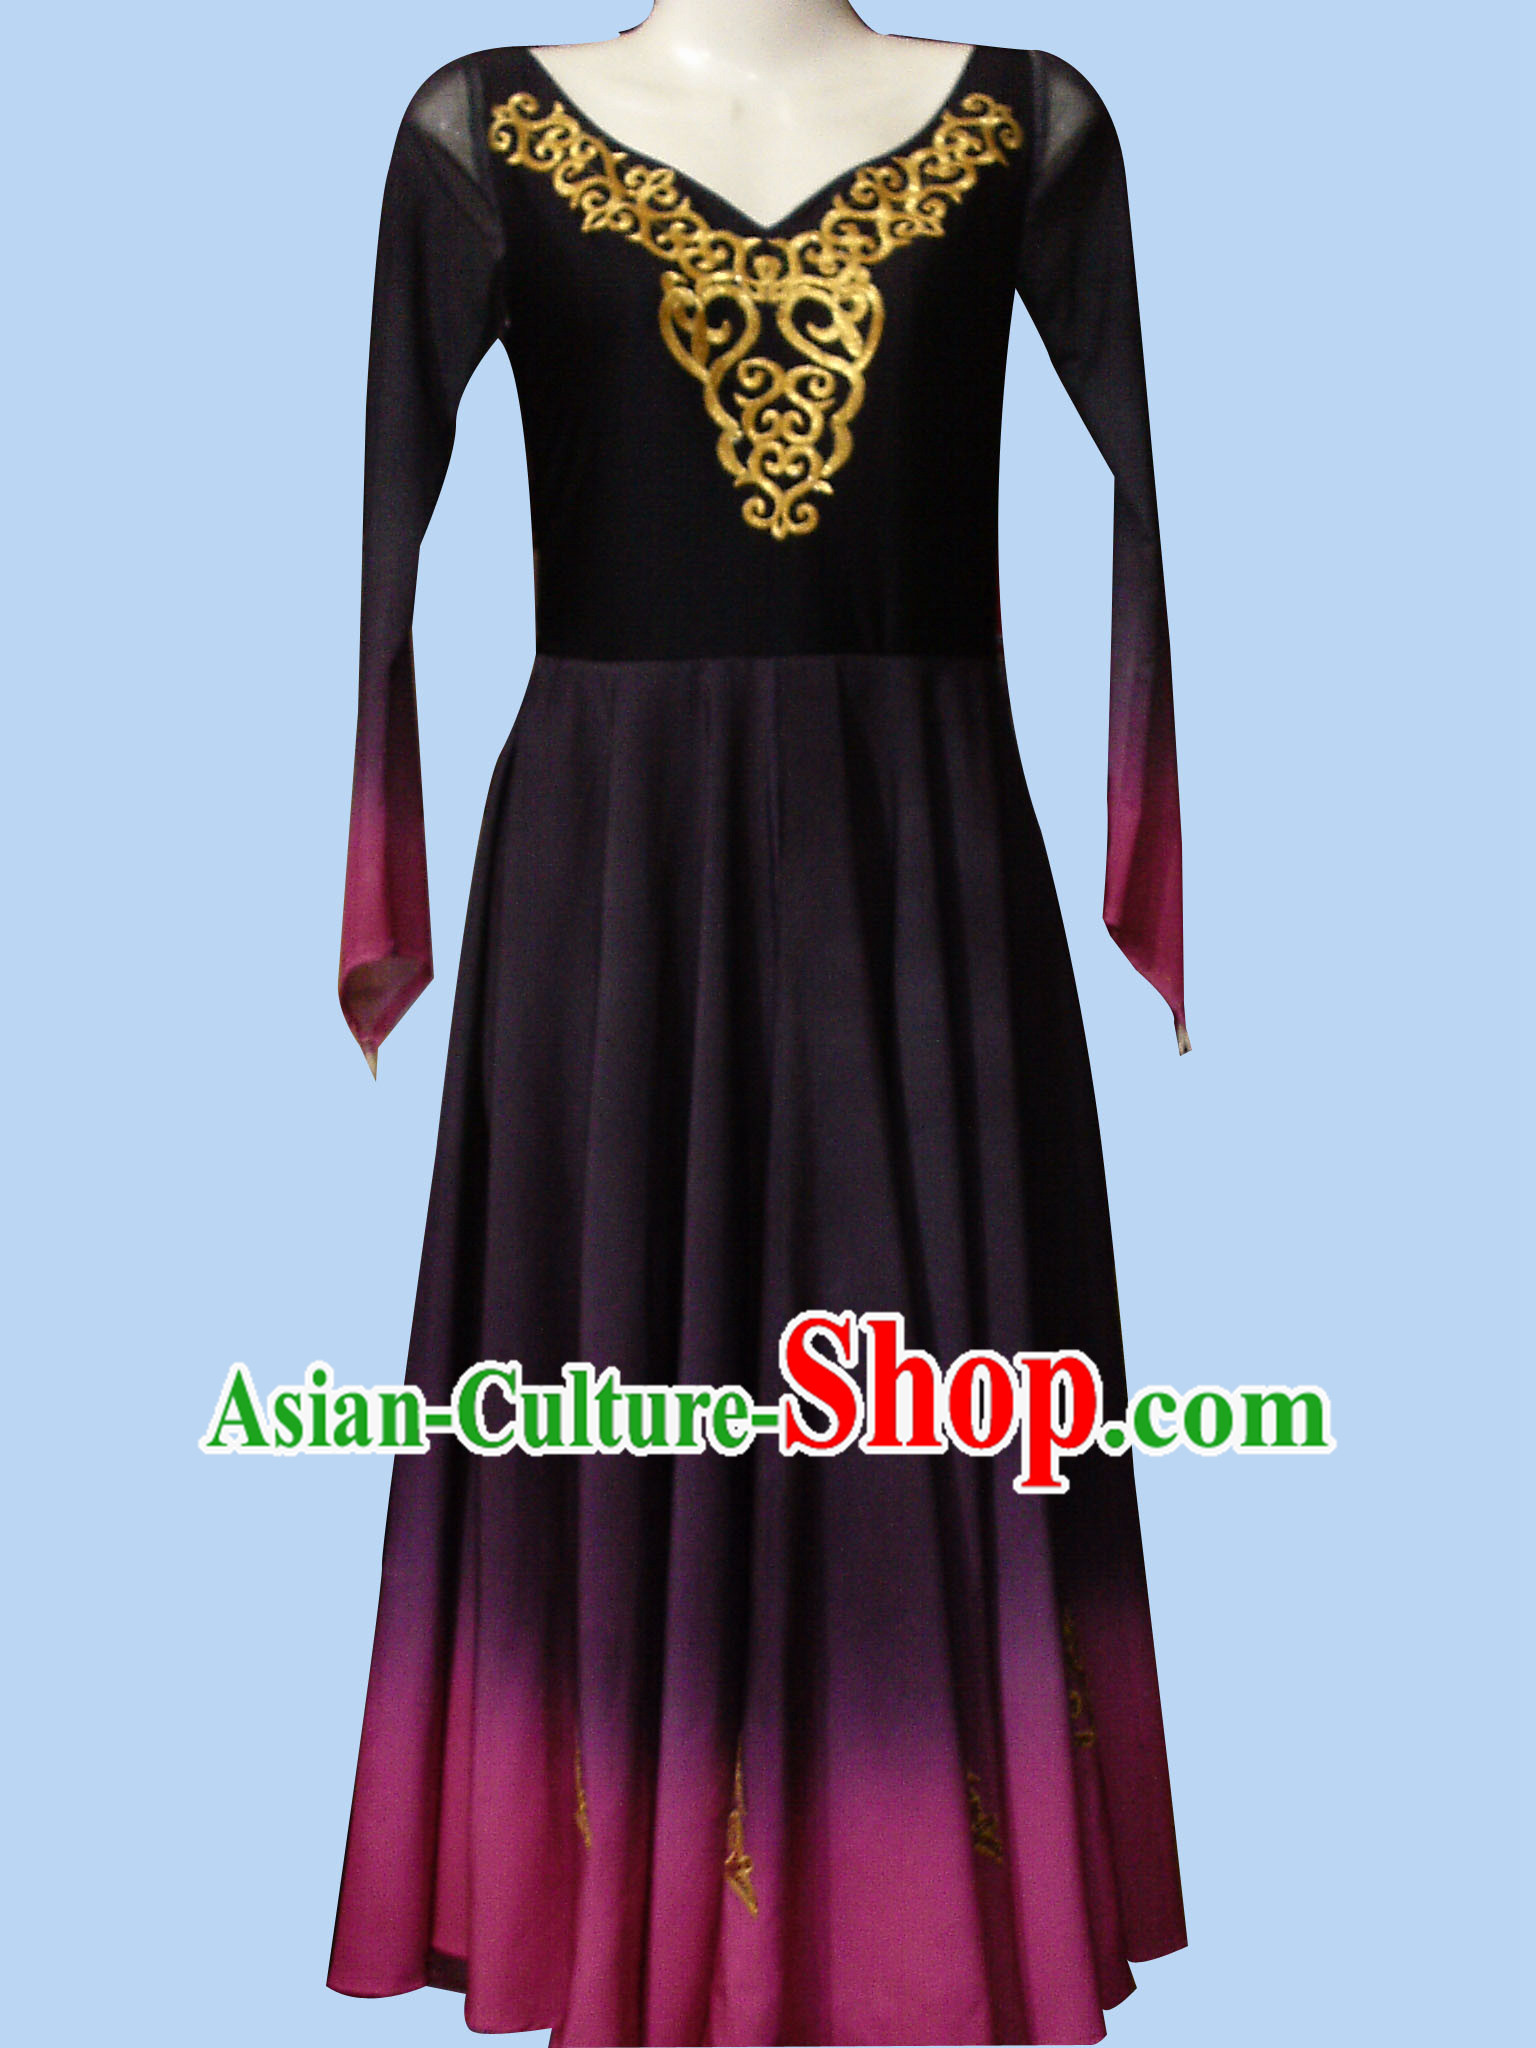 Top Chinese Xinjiang Ethnic Dance Costume Competition Dance Costumes Set